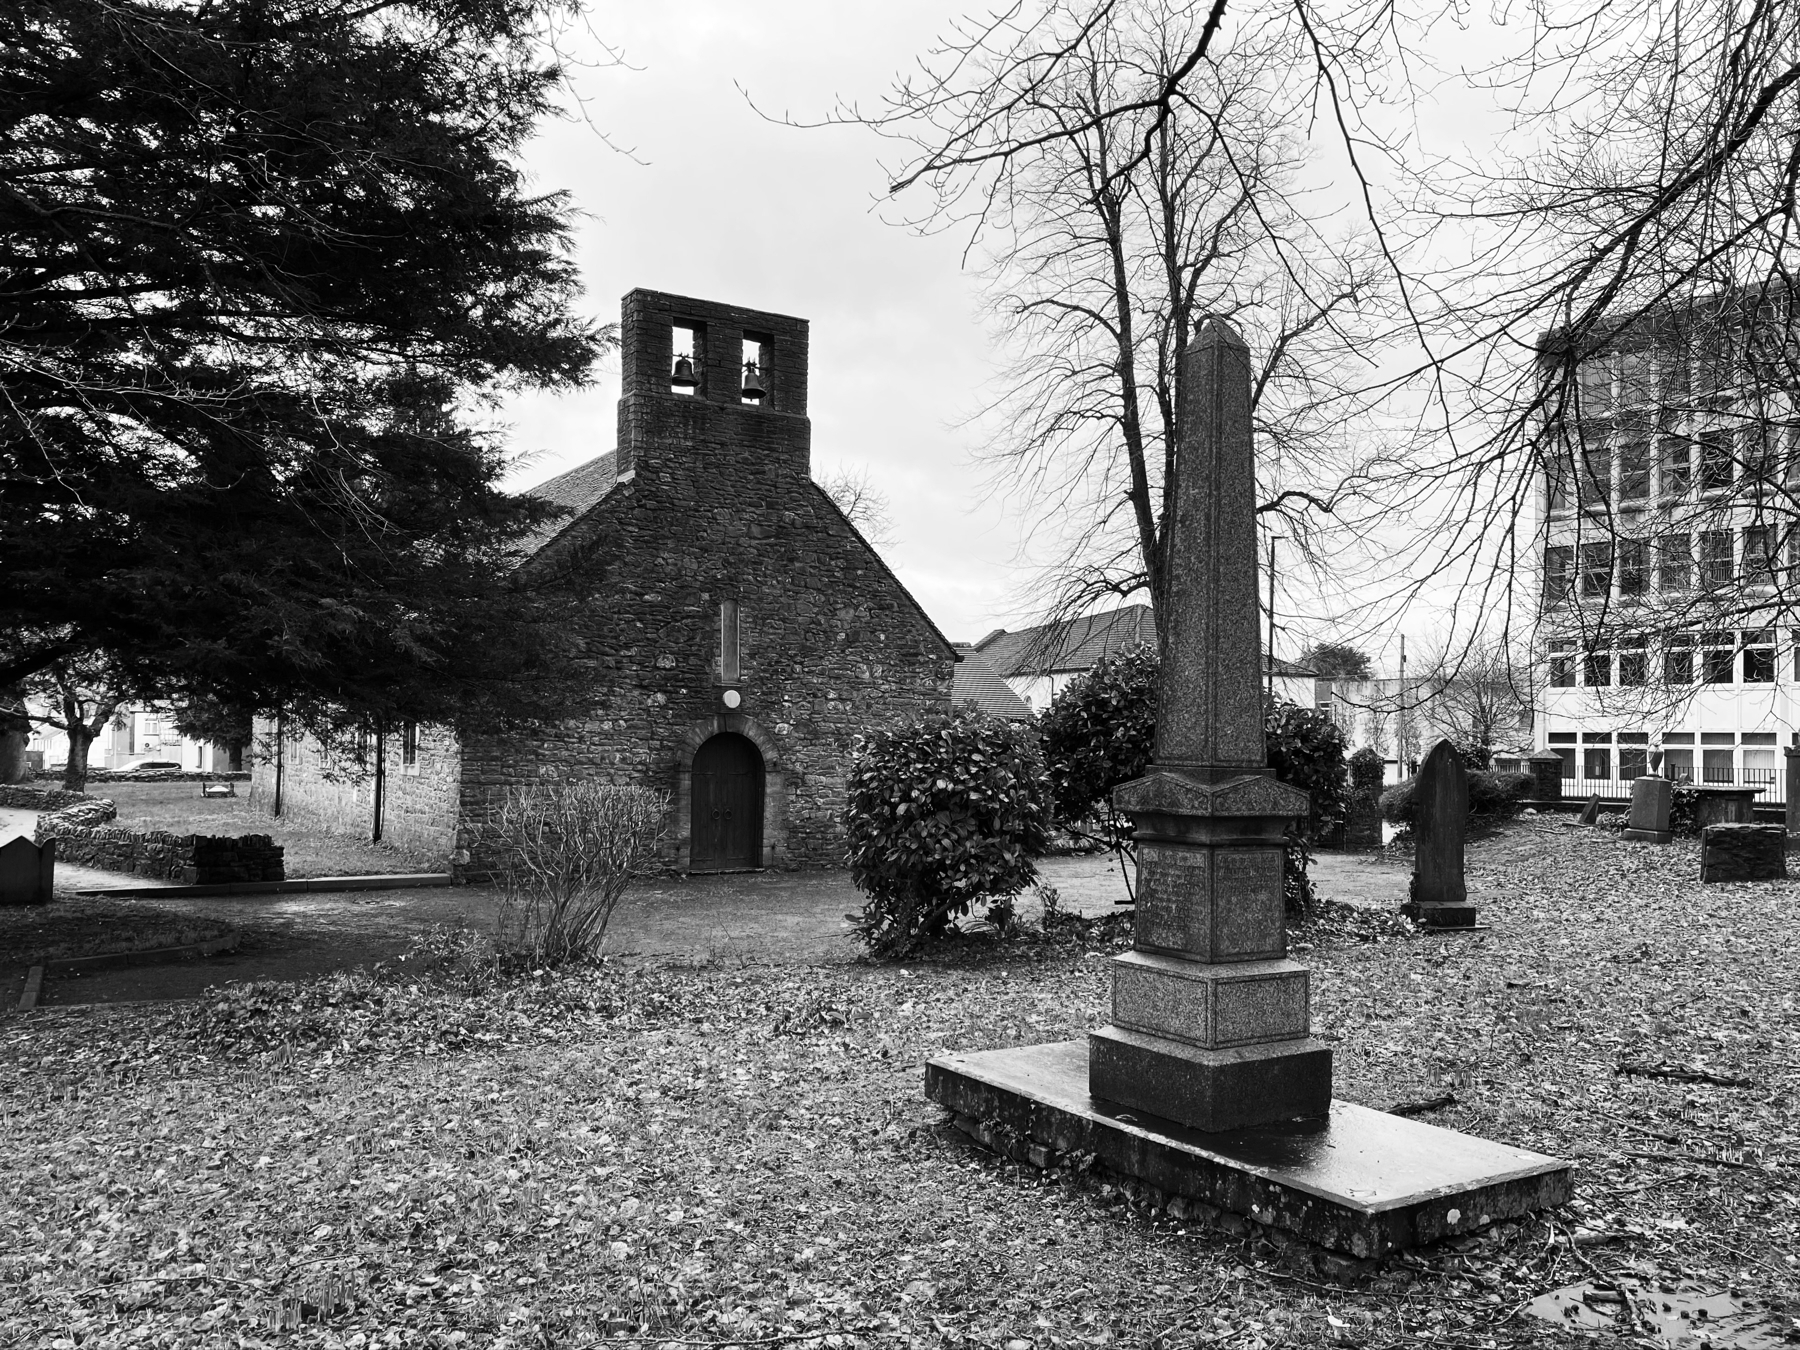 Black and white photo of an old stone chapel with a bell tower next to a cemetery with gravestones and a prominent memorial obelisk. Leafless trees and a modern building are in the background.